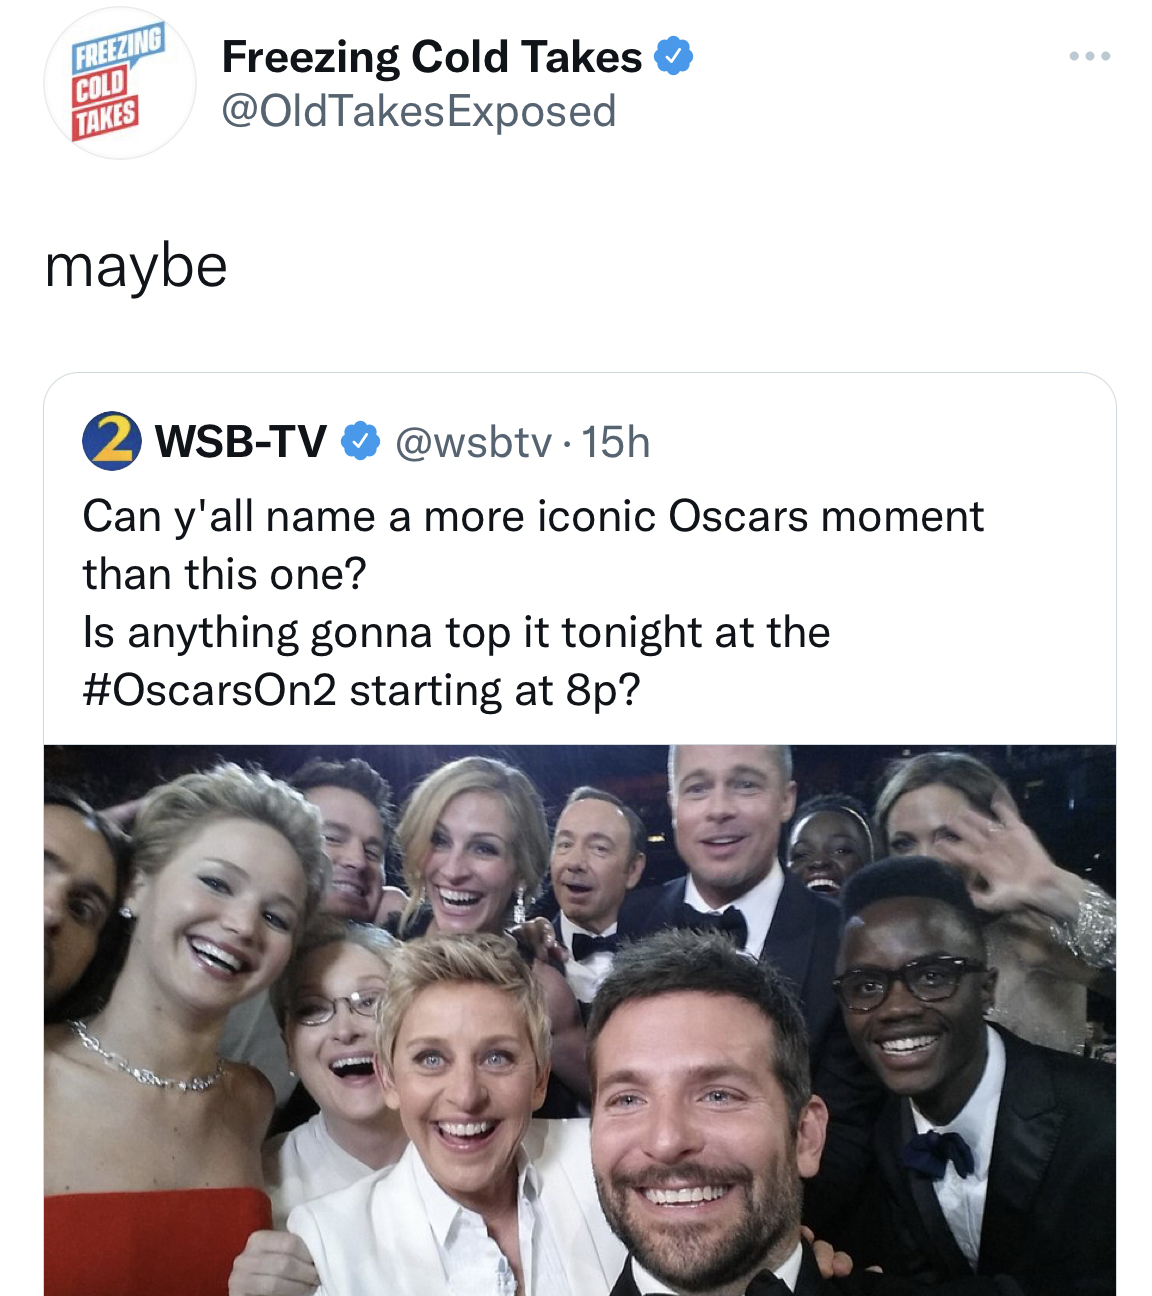 Will Smith Slap memes - ellen oscar selfie tweet - Prezime Cold Freezing Cold Takes Takes maybe 2 WsbTv .15h Can y'all name a more iconic Oscars moment than this one? Is anything gonna top it tonight at the starting at 8p?